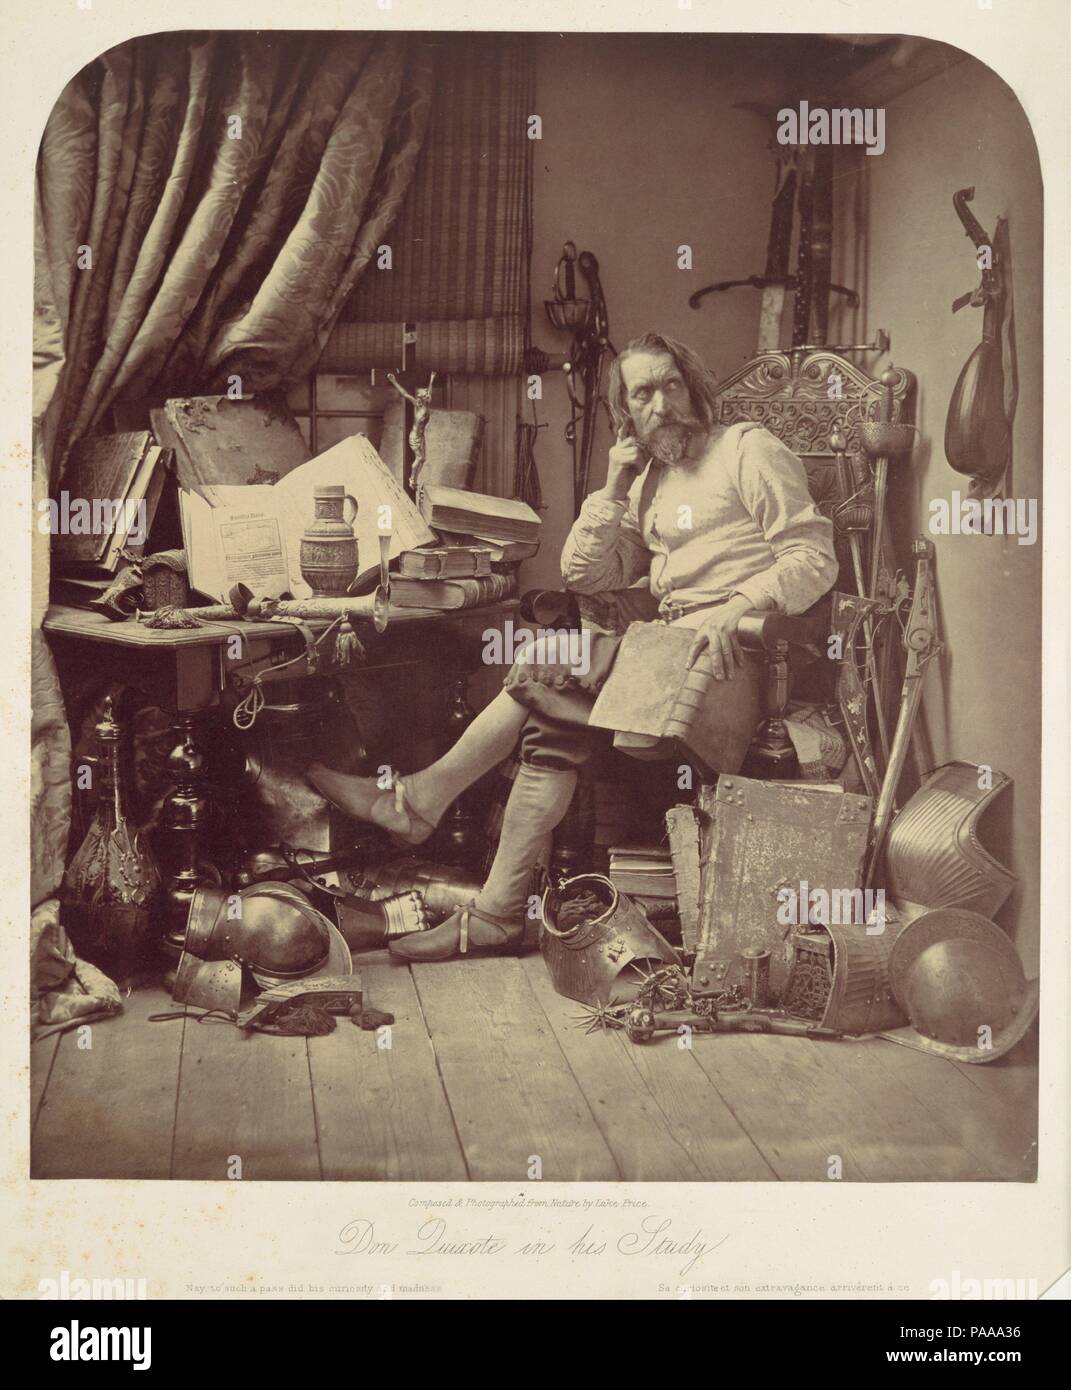 Don Quixote in His Study. Artist: William Frederick Lake Price (British, London 1810-1896 Lee, Kent). Dimensions: Image: 31.9 x 28 cm (12 9/16 x 11 in.)  Mount: 42.6 x 33.3 cm (16 3/4 x 13 1/8 in.). Printer: J. Spencer. Date: 1857.  This carefully staged tableau was among the most widely admired Victorian photographs. Price self-consciously sought to elevate the still-new medium to the level of 'high art' by emulating the ambitious literary subjects, expressive gestures, and period details of grand history painting. Although this approach was largely overshadowed in subsequent years by one tha Stock Photo